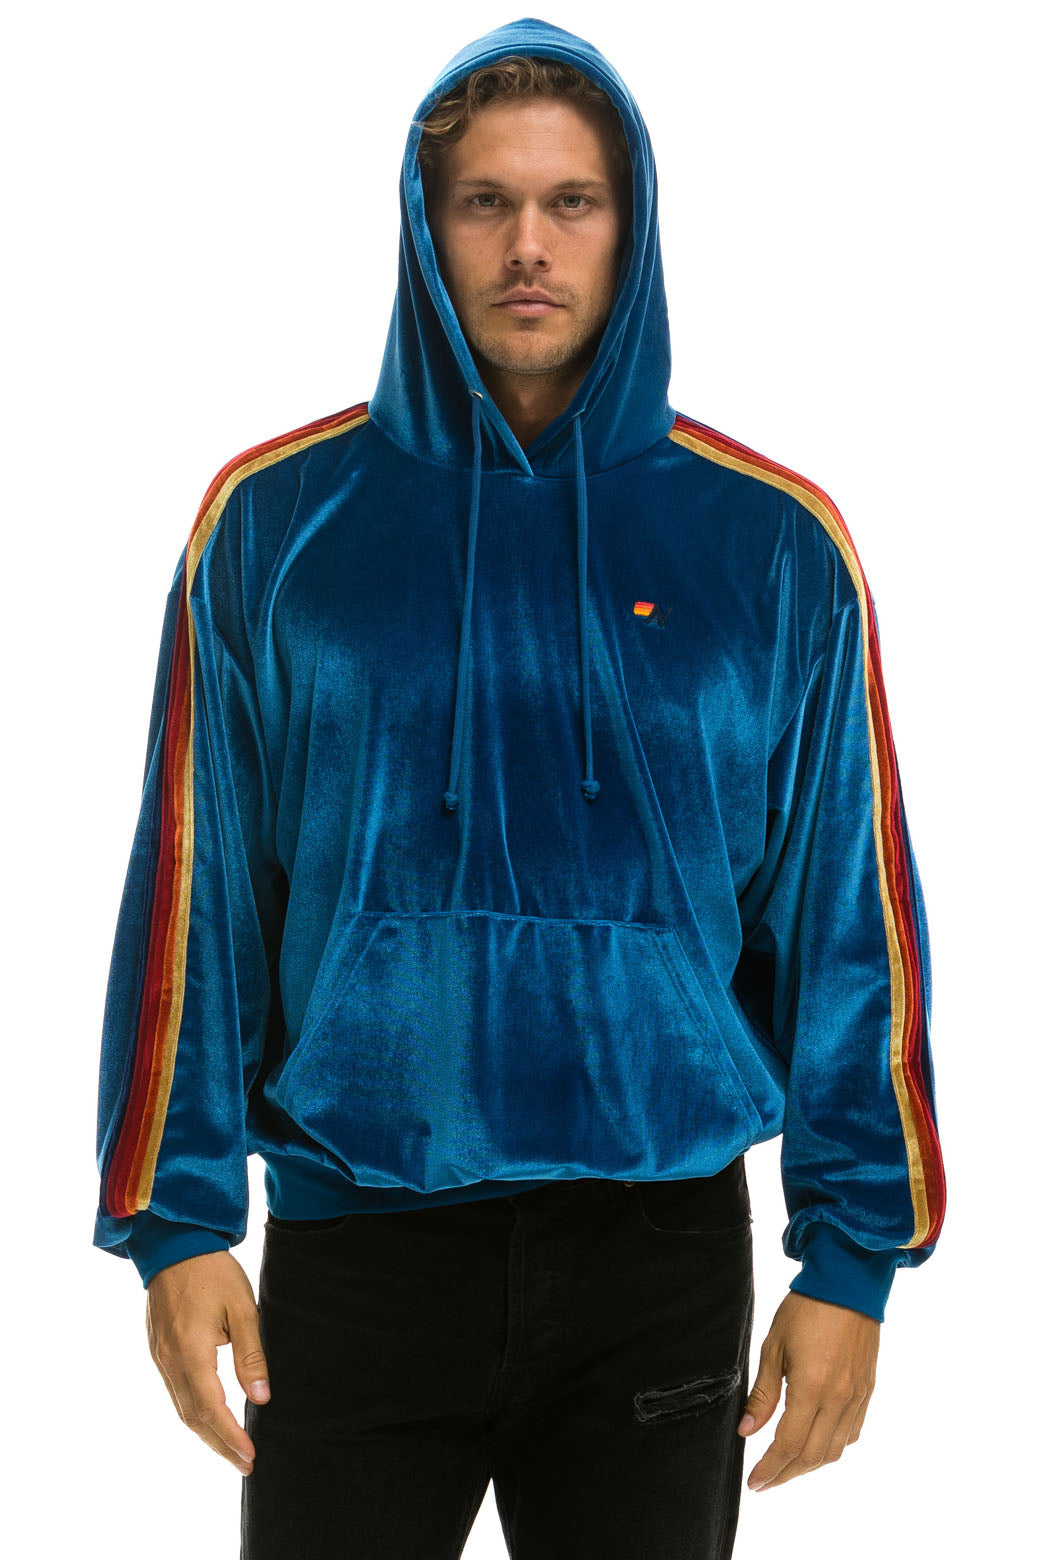 CLASSIC VELVET RELAXED PULLOVER HOODIE - VINTAGE BLUE Hoodie Aviator Nation 